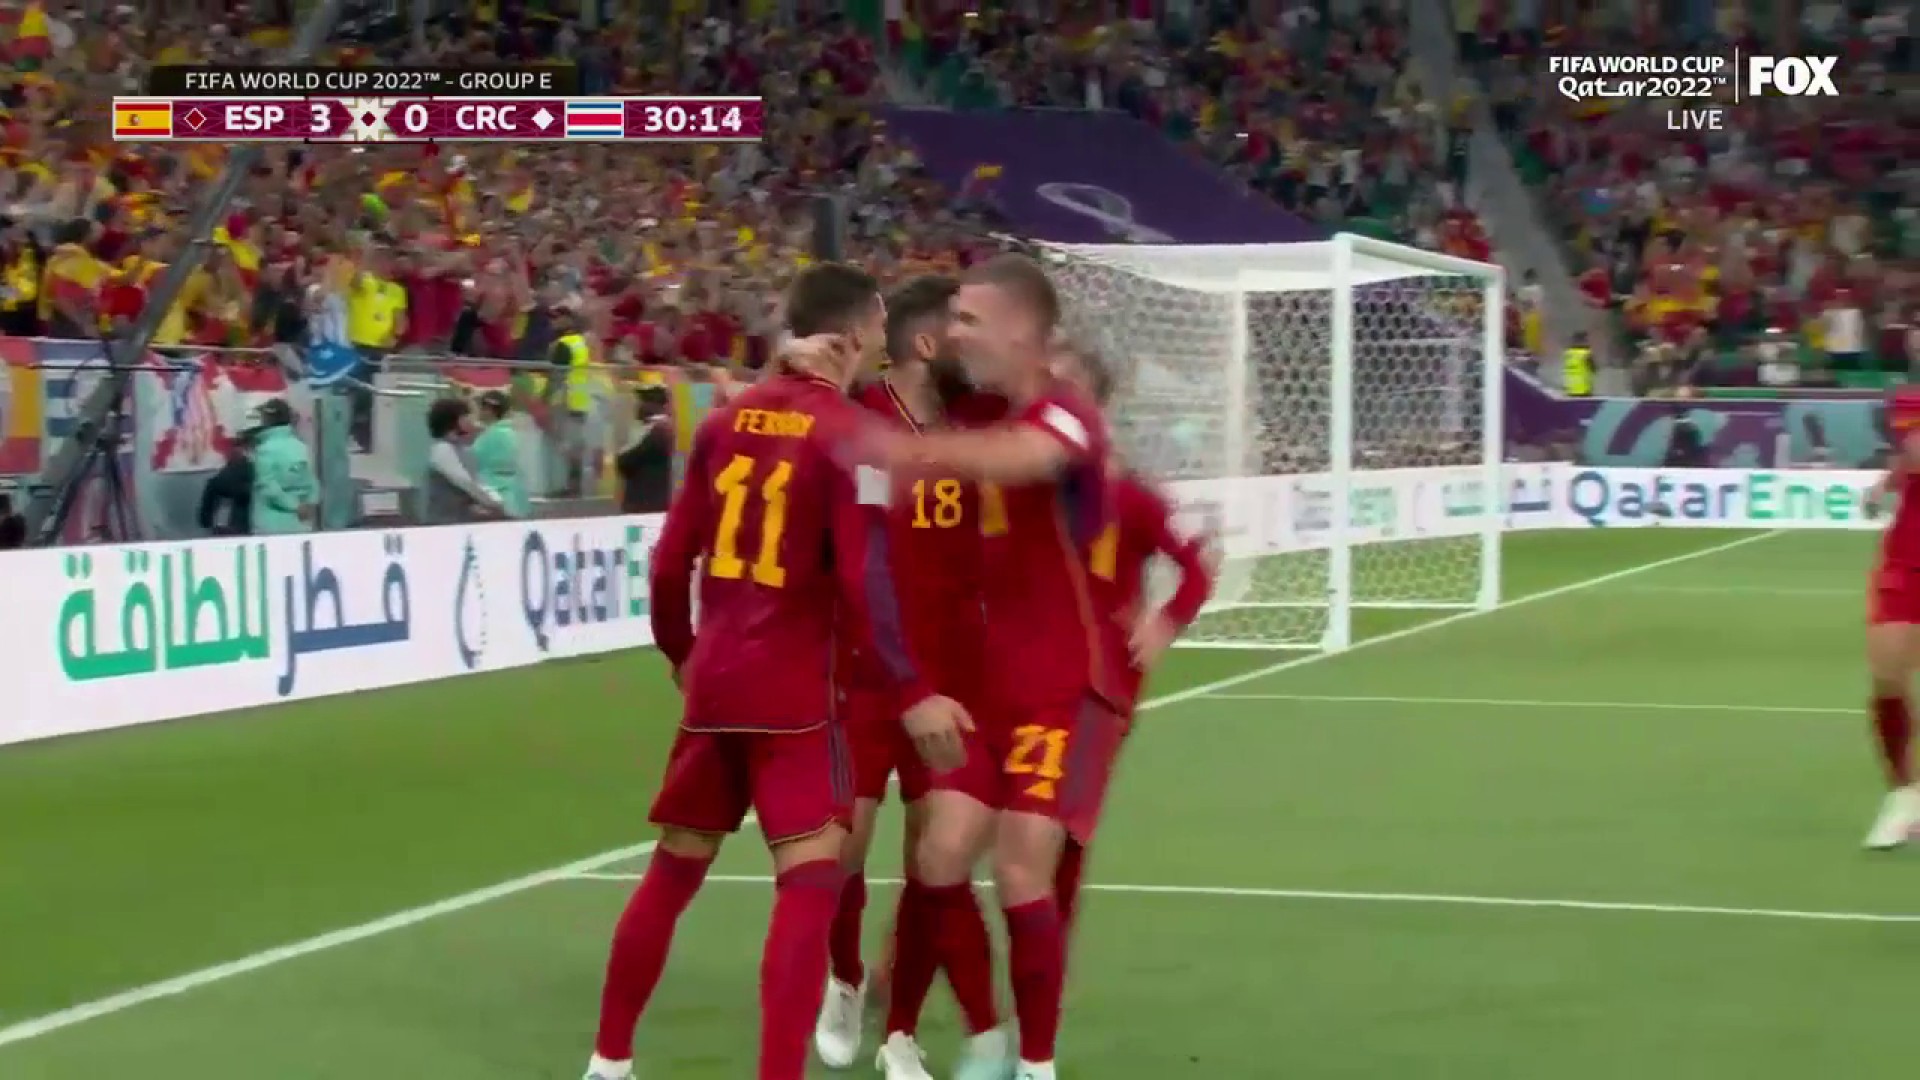 Too easy for Ferran Torres 🎯

Spain makes it 3-0 in the first half”